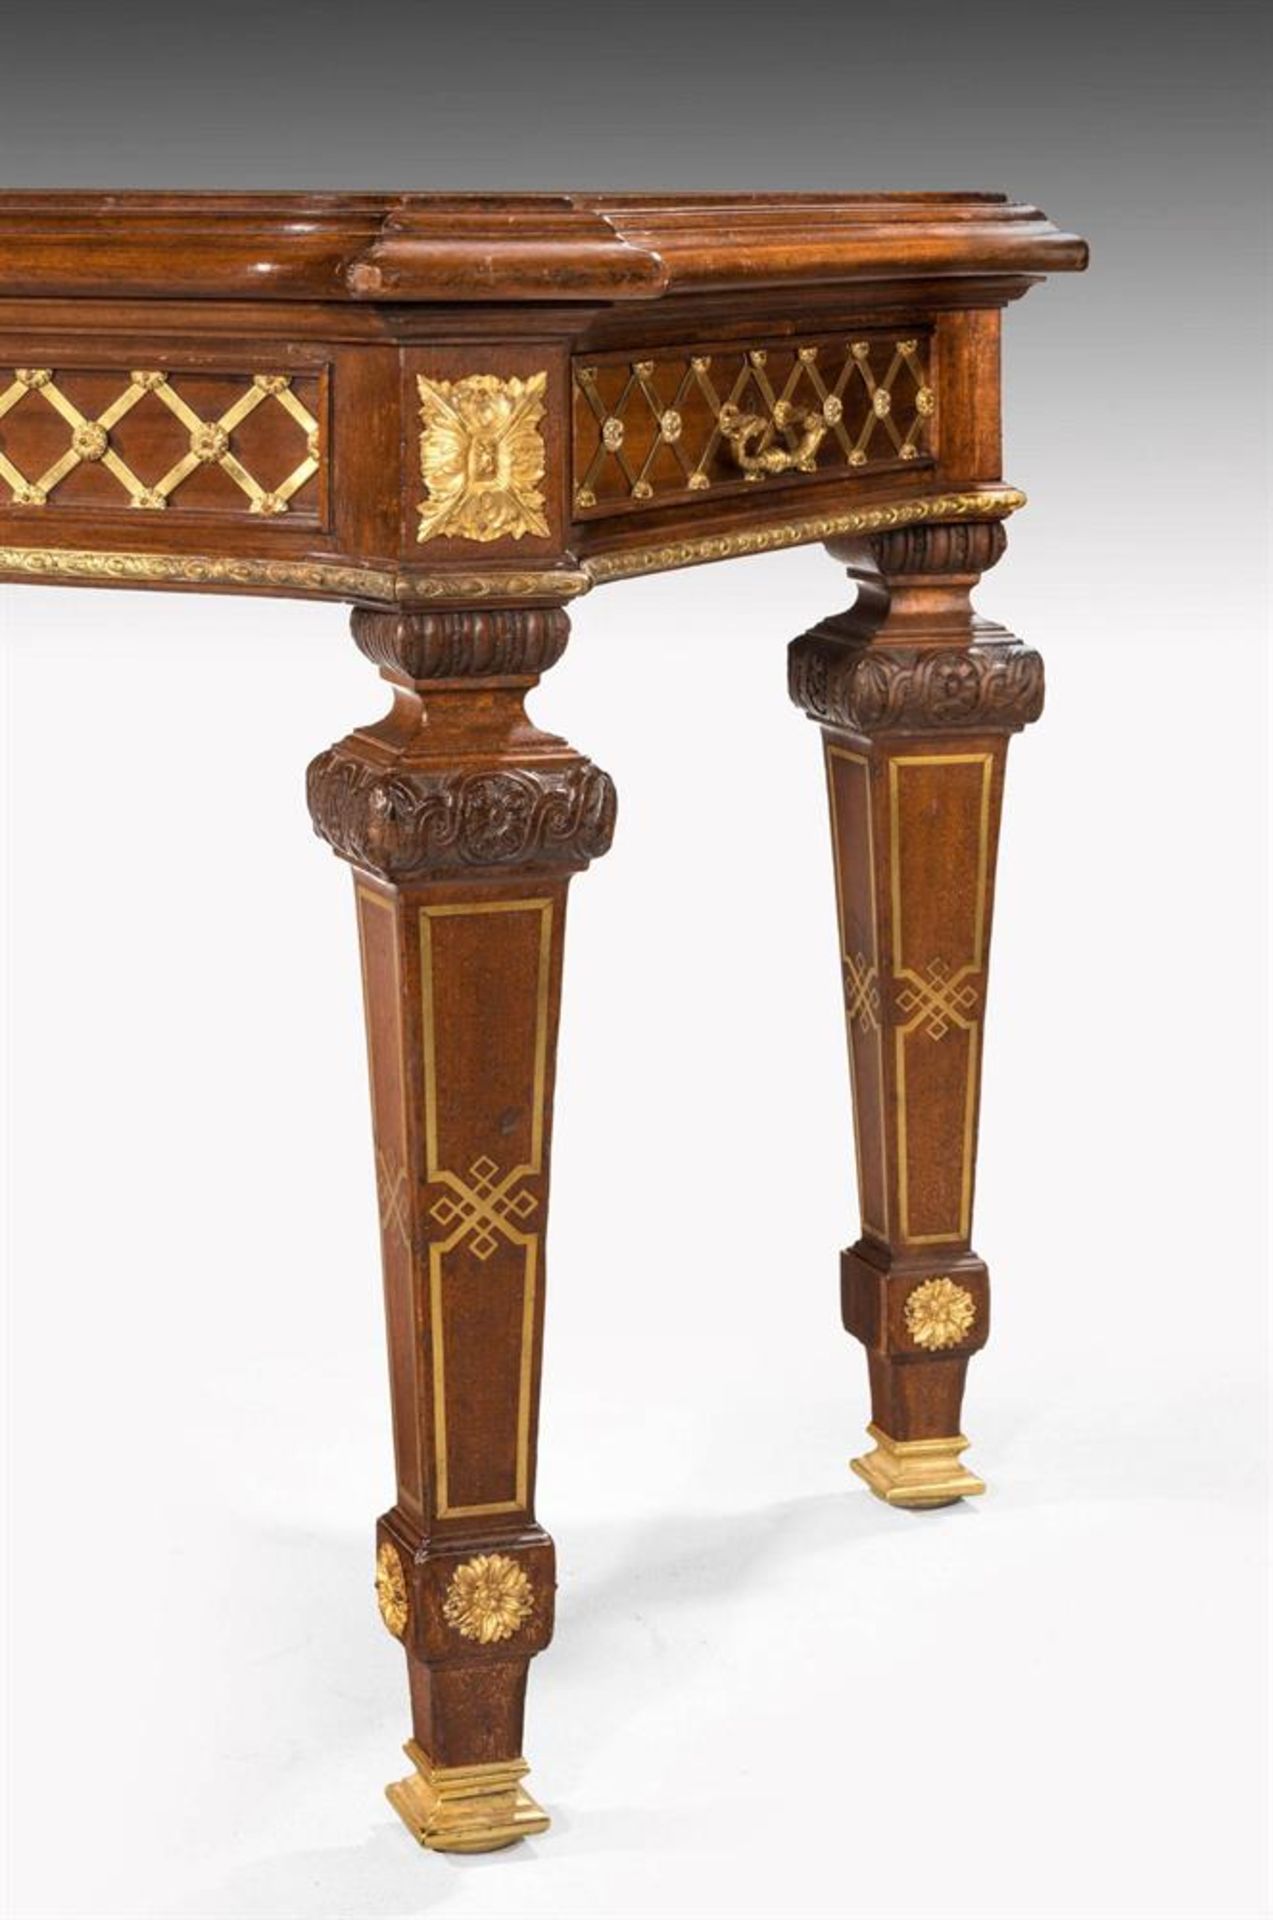 A PAIR OF MAHOGANY, BRASS INLAID AND GILT METAL MOUNTED LIBRARY TABLES, LATE 19TH/20TH CENTURY - Image 6 of 7